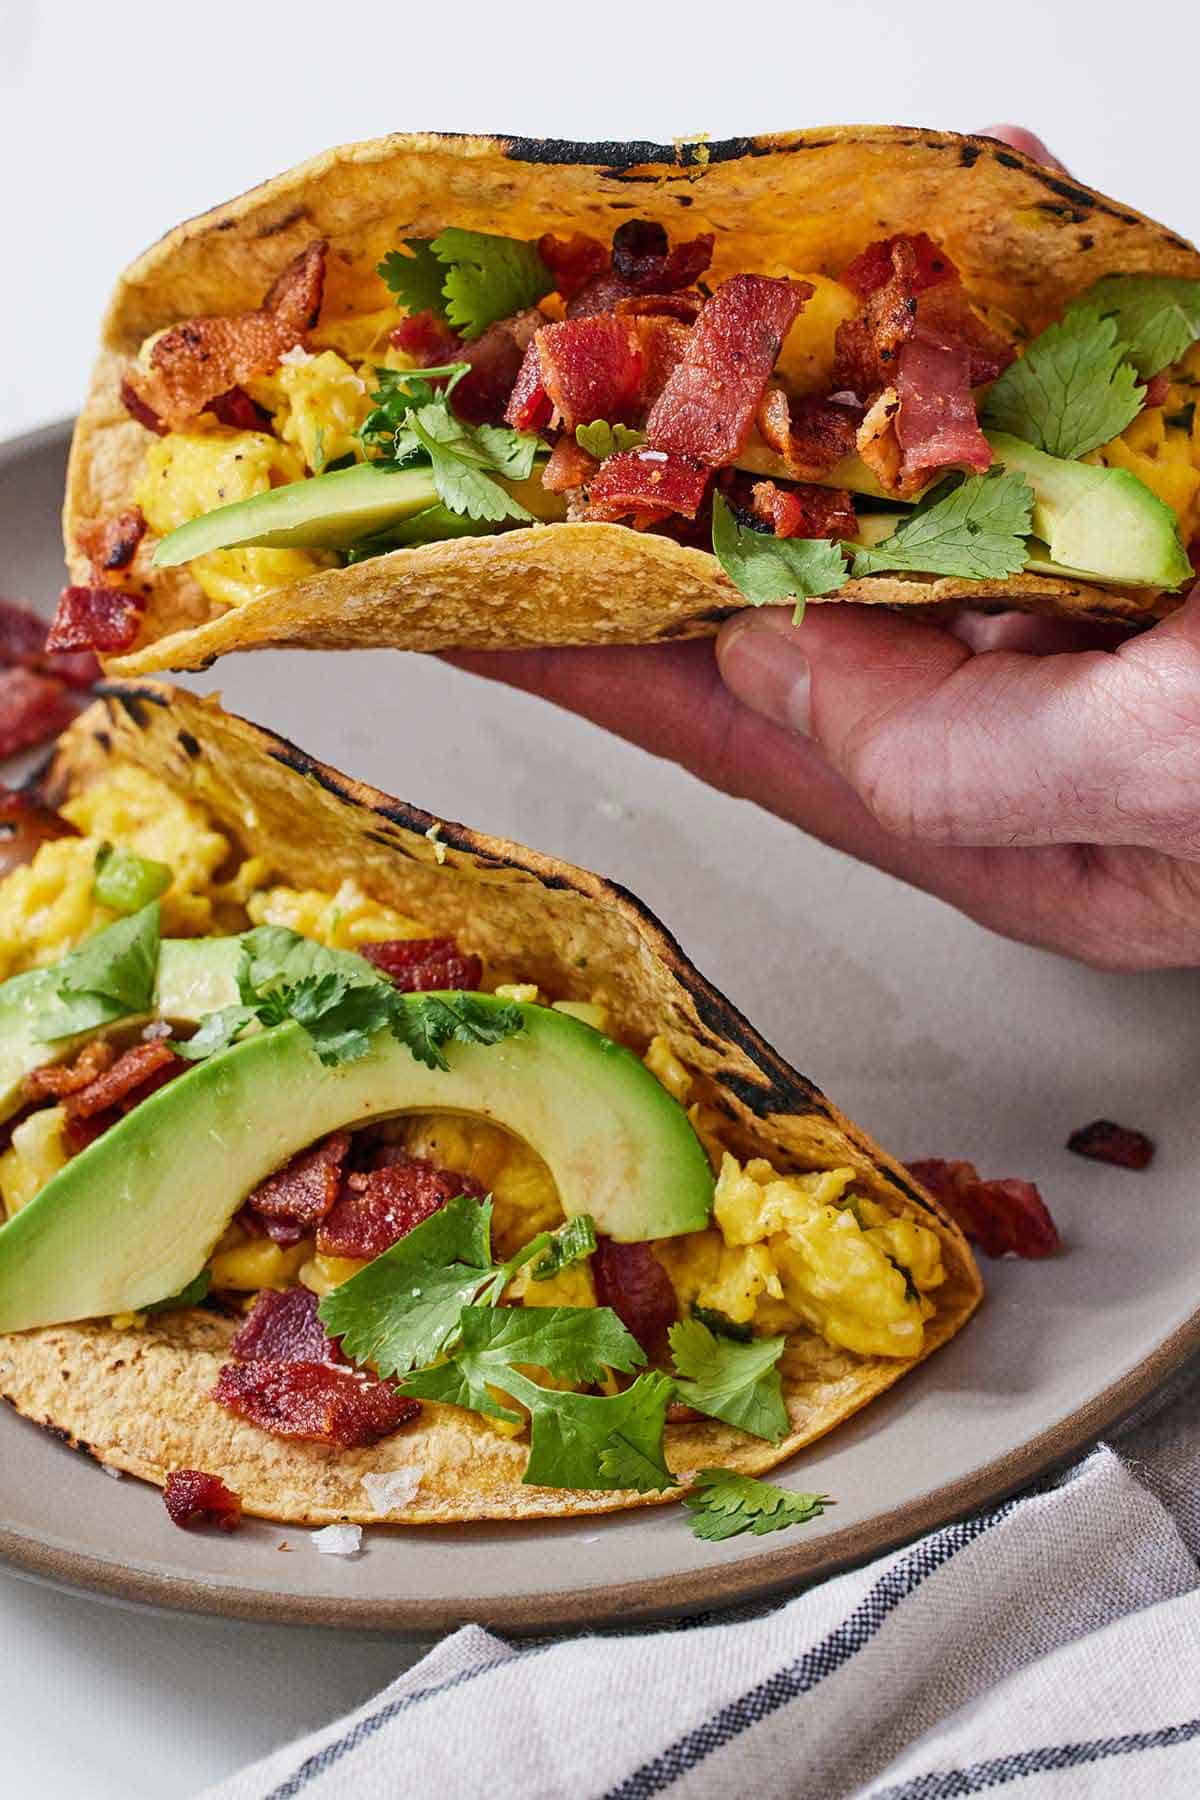 A hand lifting a breakfast taco off a plate.